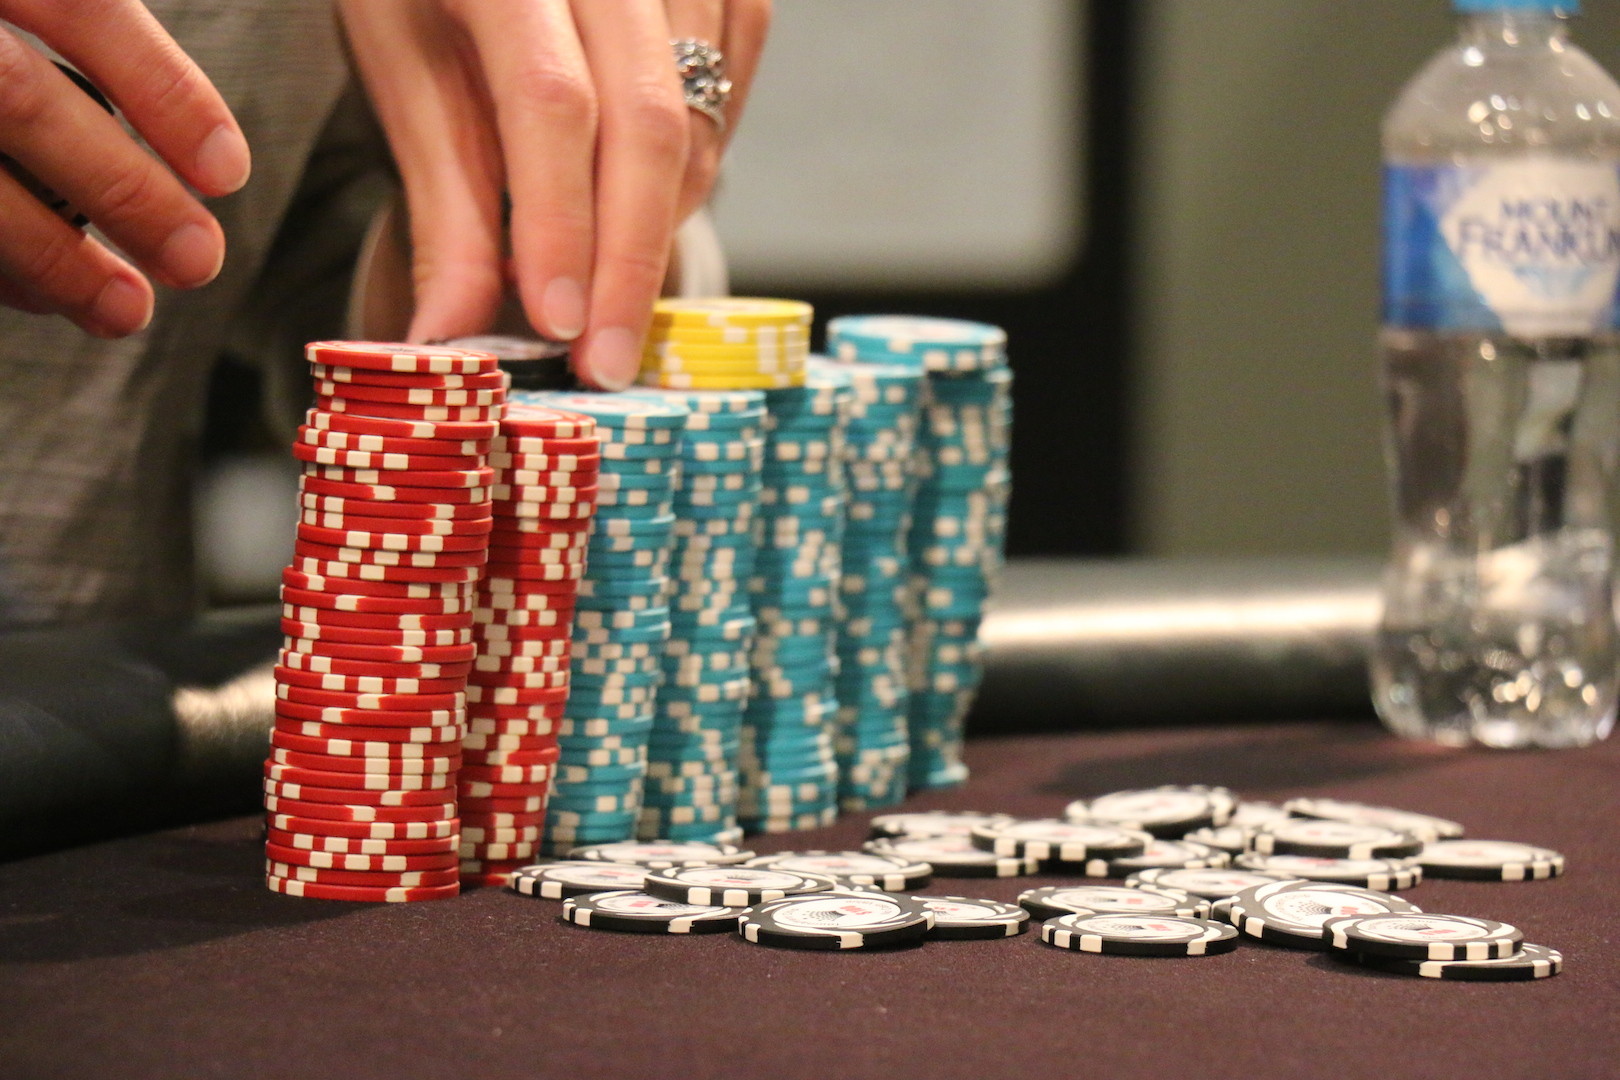 How to build your stack and stop seeing chips in the first half of tournaments?